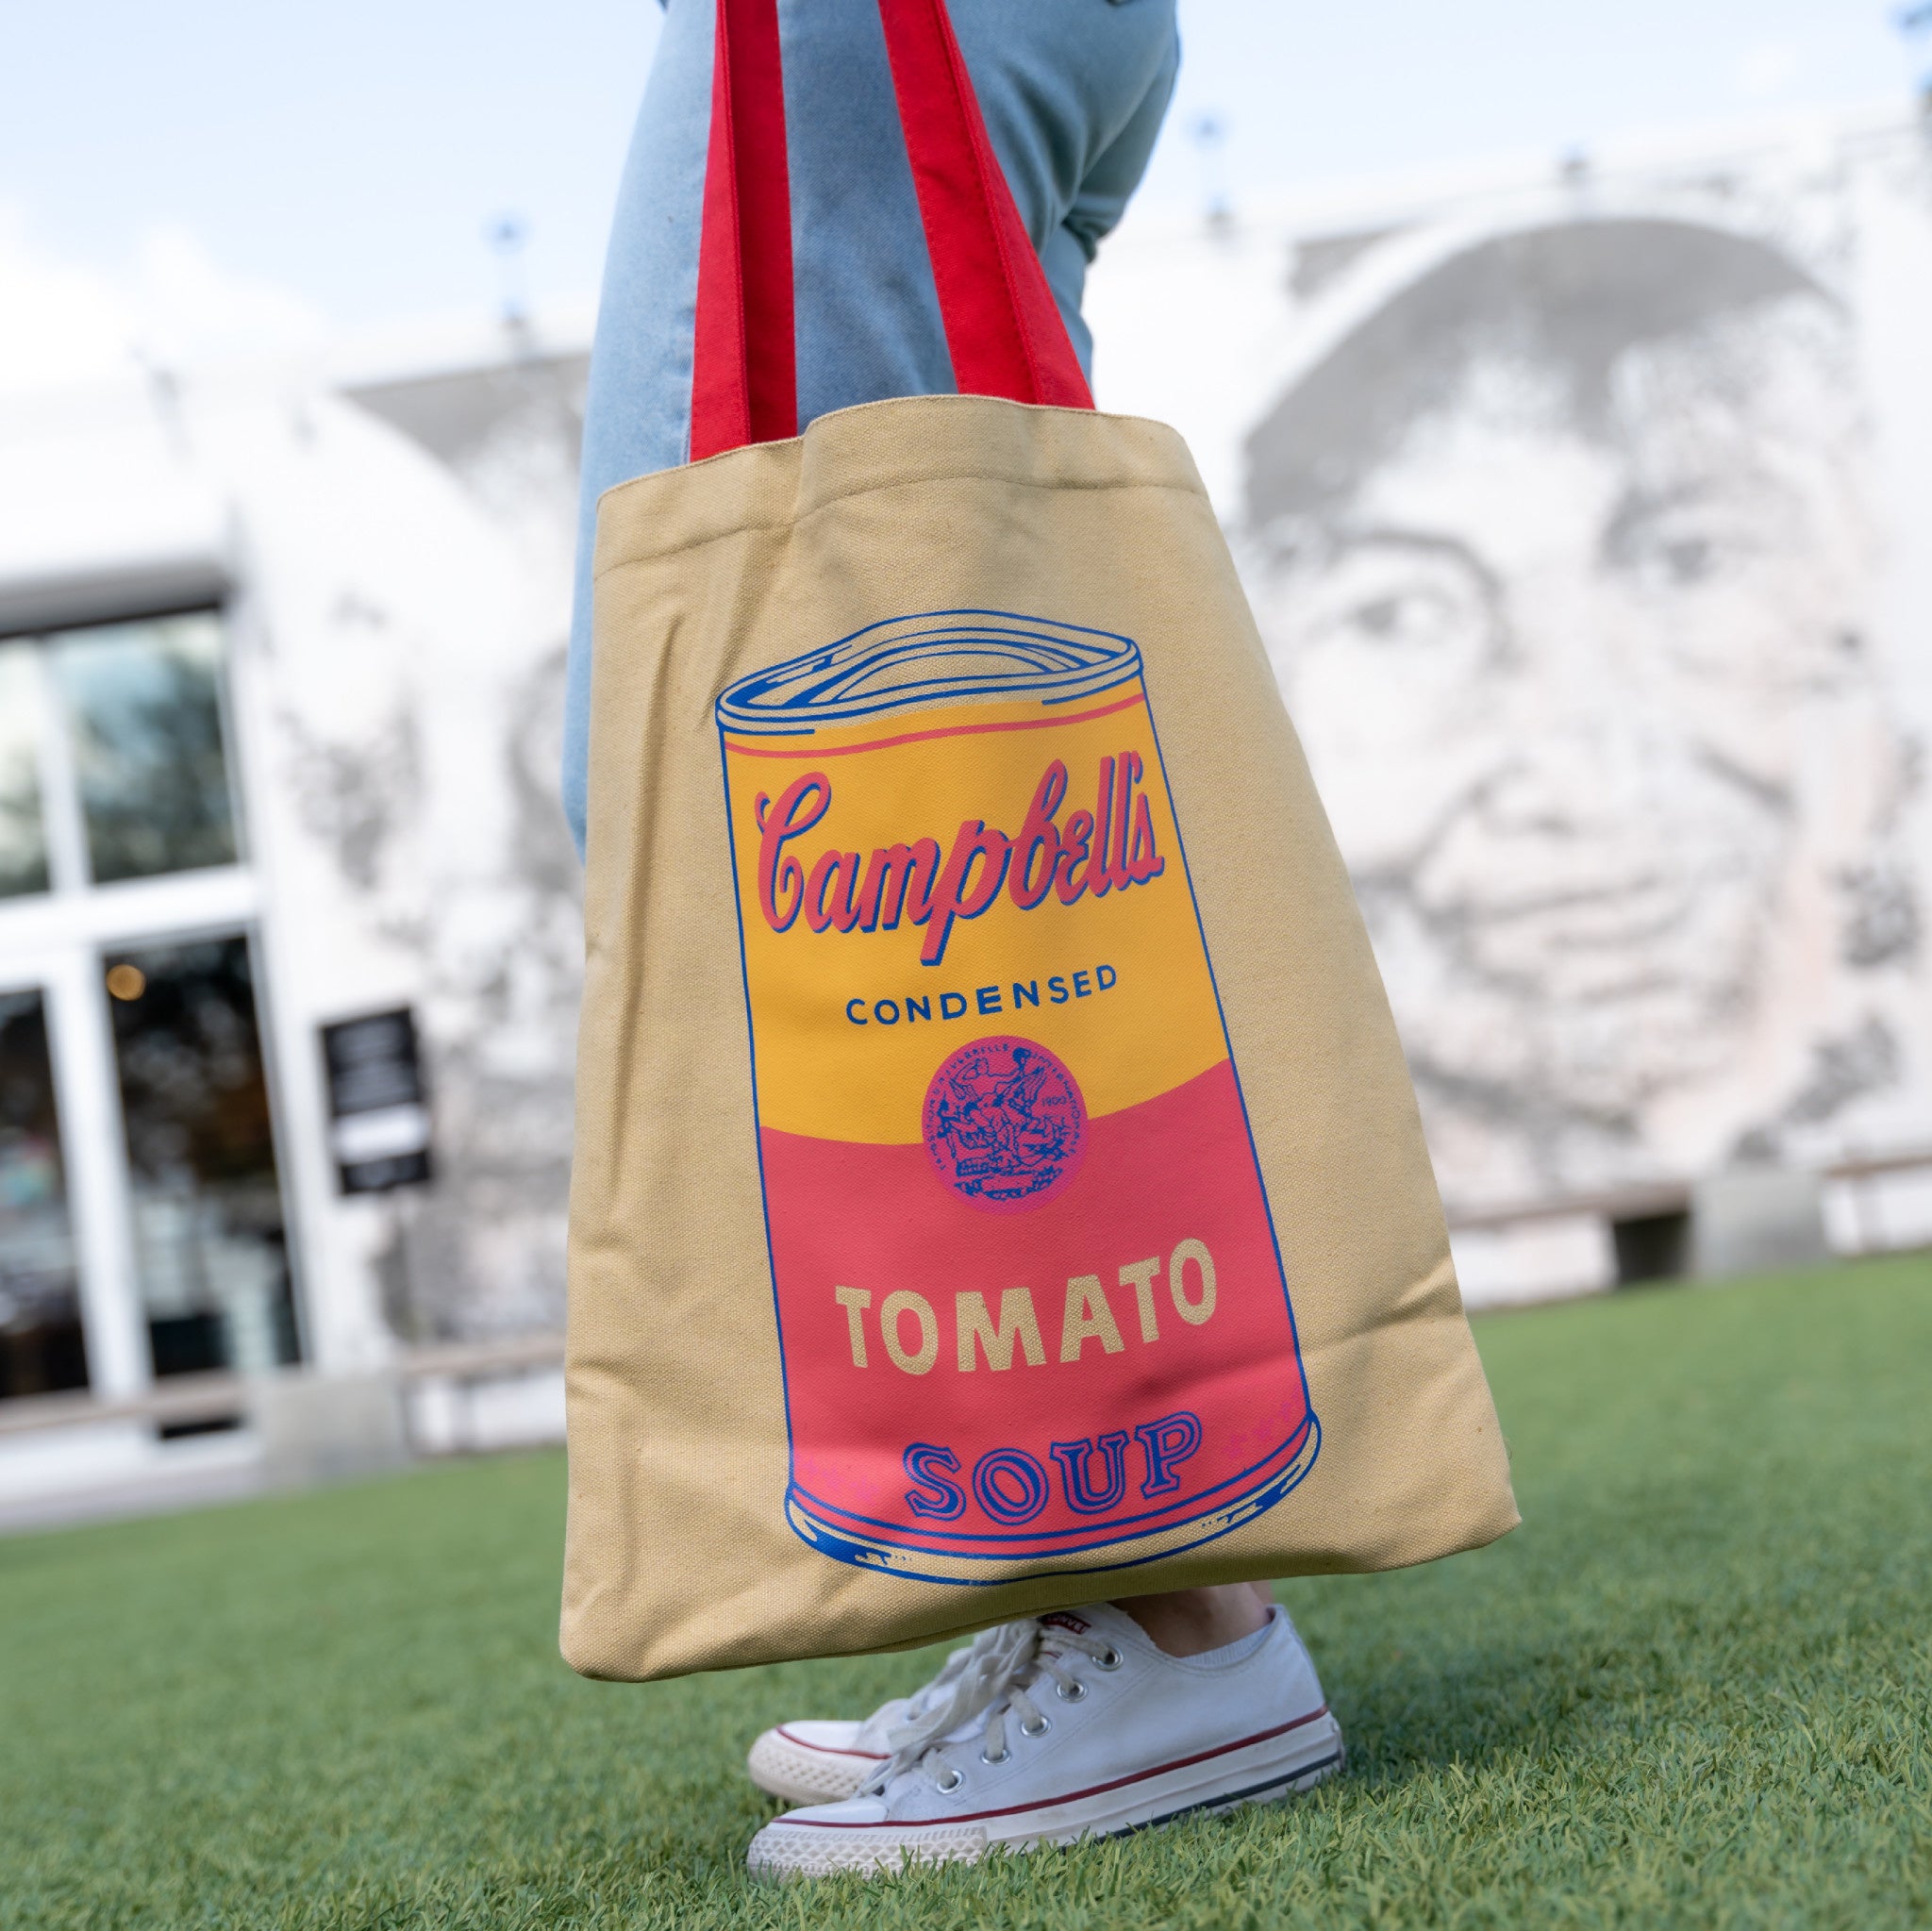 Andy Warhol CAMPBELL'S SOUP Tote Bag - Wynwood Walls Shop